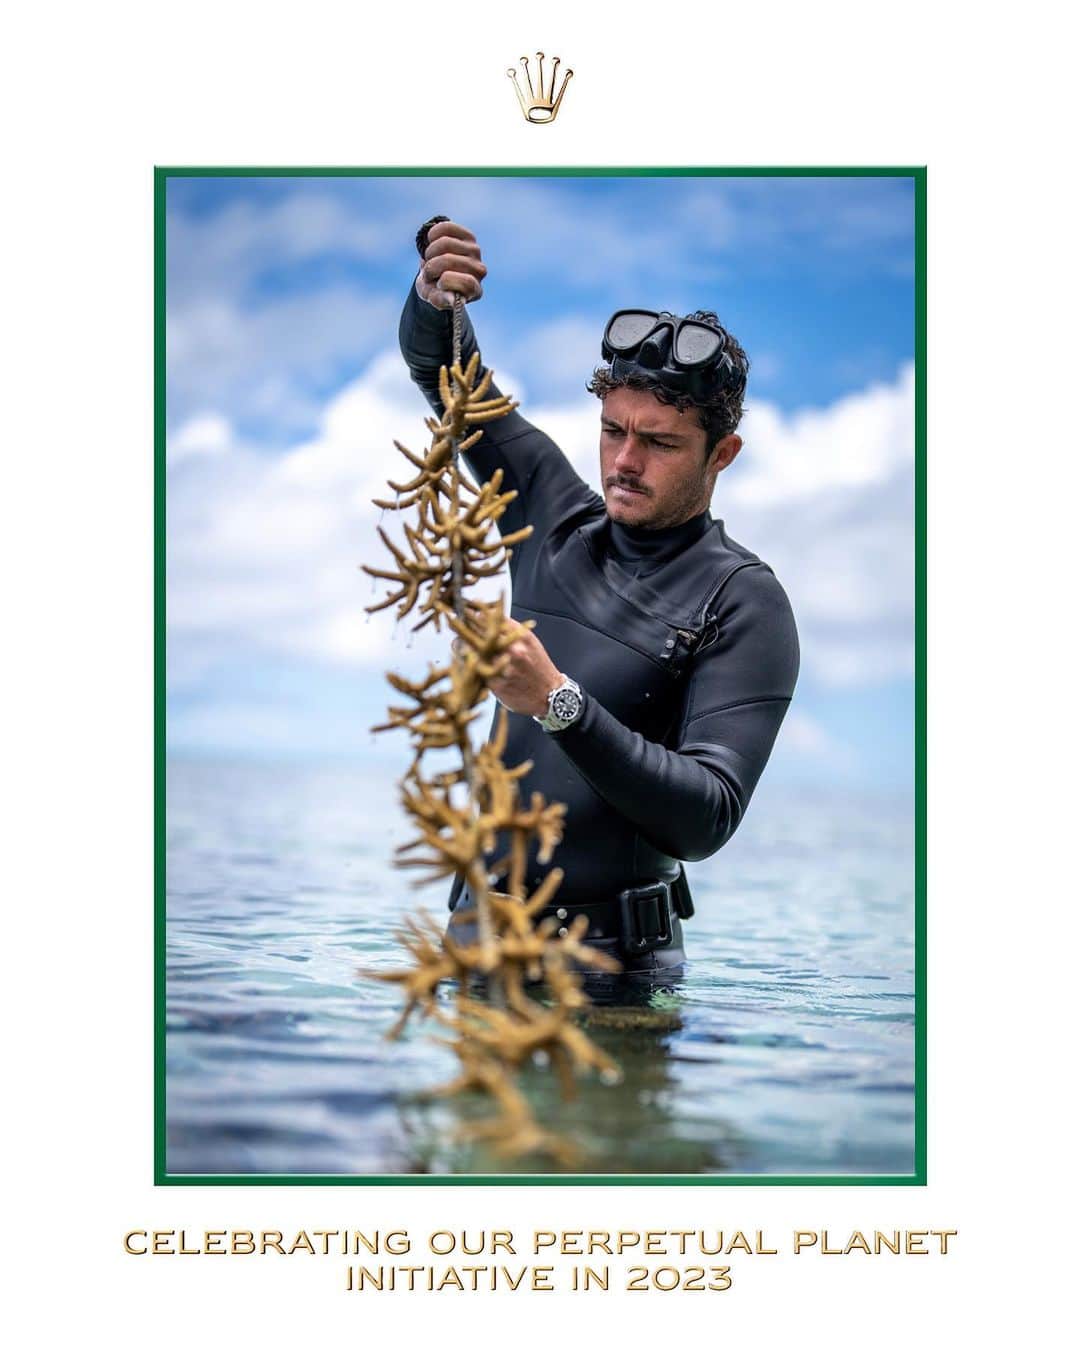 rolexのインスタグラム：「A time to celebrate. Because the Rolex Perpetual Planet Initiative gives hope for the future. This year, all over the world, its partners researched ecosystems under threat, including ocean conservation organization Coral Gardeners; conservation photographers Paul Nicklen and Cristina Mittermeier; explorer Steve Boyes; fisheries ecologist João Campos-Silva; ice core scientist Alison Criscitiello; and international mountain guide Dawa Yangzum Sherpa. #Rolex #PerpetualPlanet For more details about this see the link in the profile.」